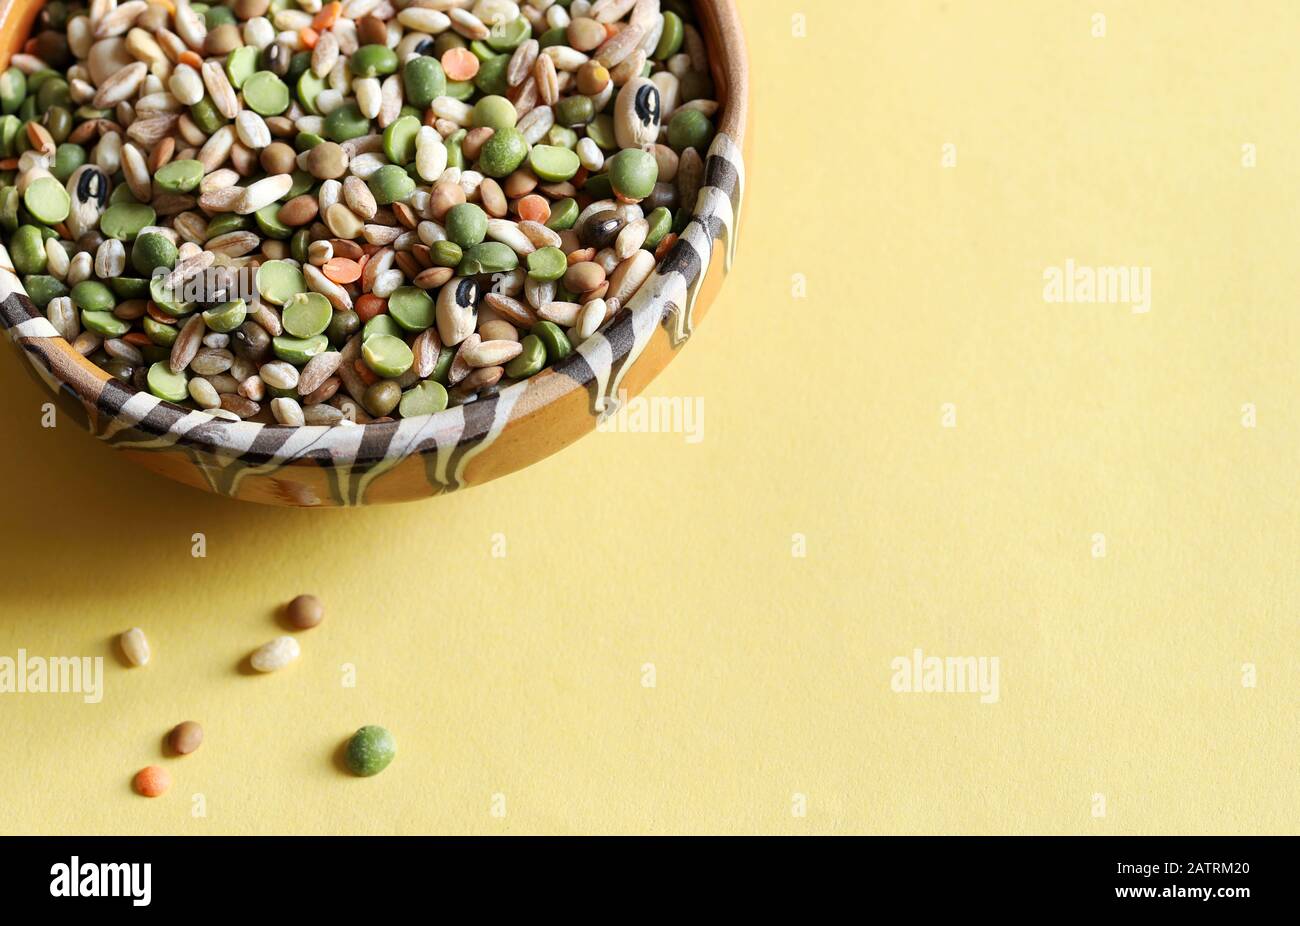 Mixed dried legumes in the bowl isolated on a yellow background.Top view. Stock Photo